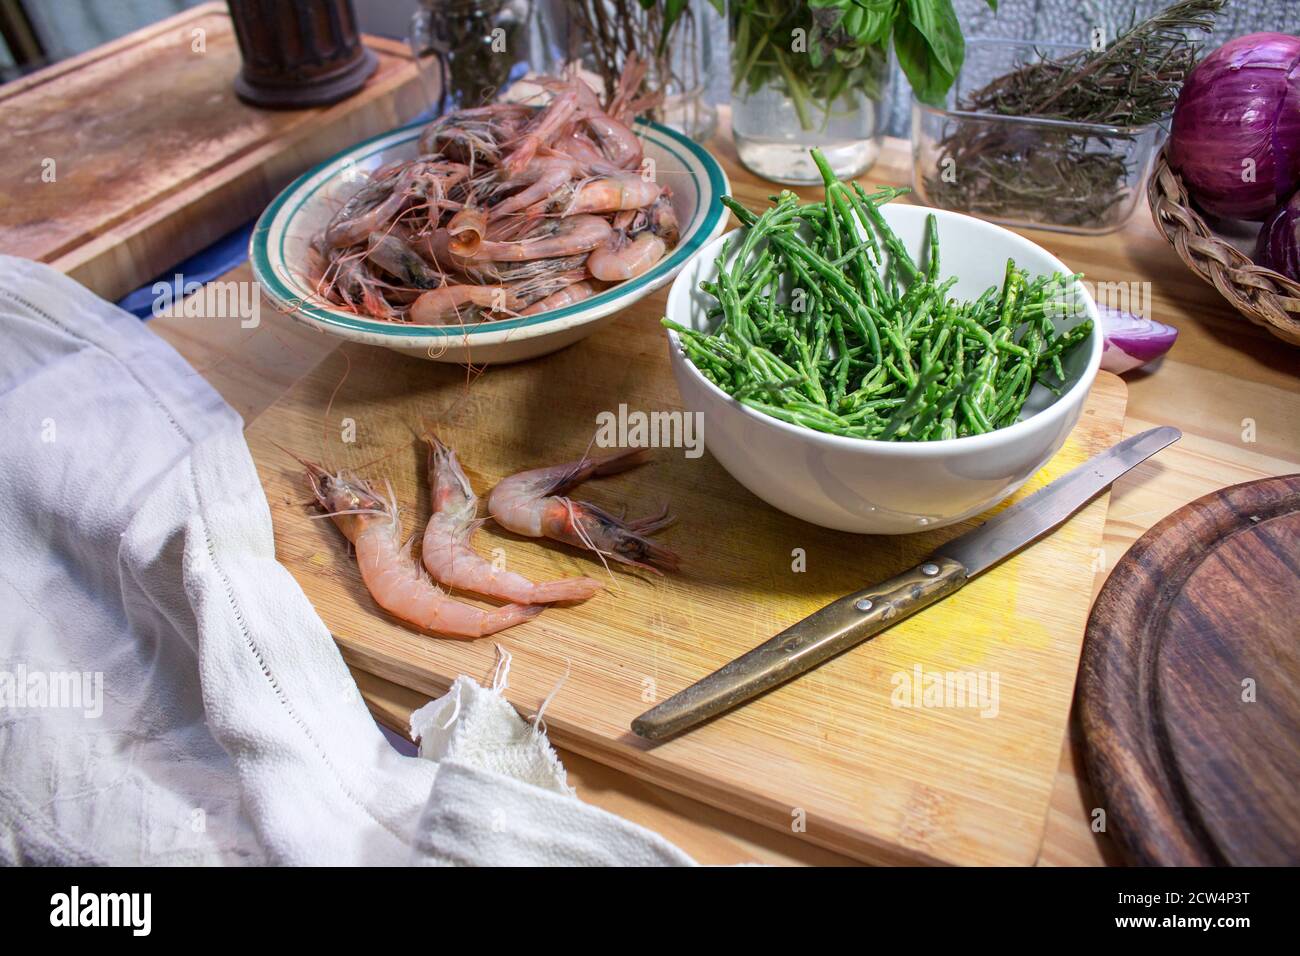 A bowl with salicornia (sea asparagus) and a plate full of Mediterranean shrimp on a wooden surface Stock Photo